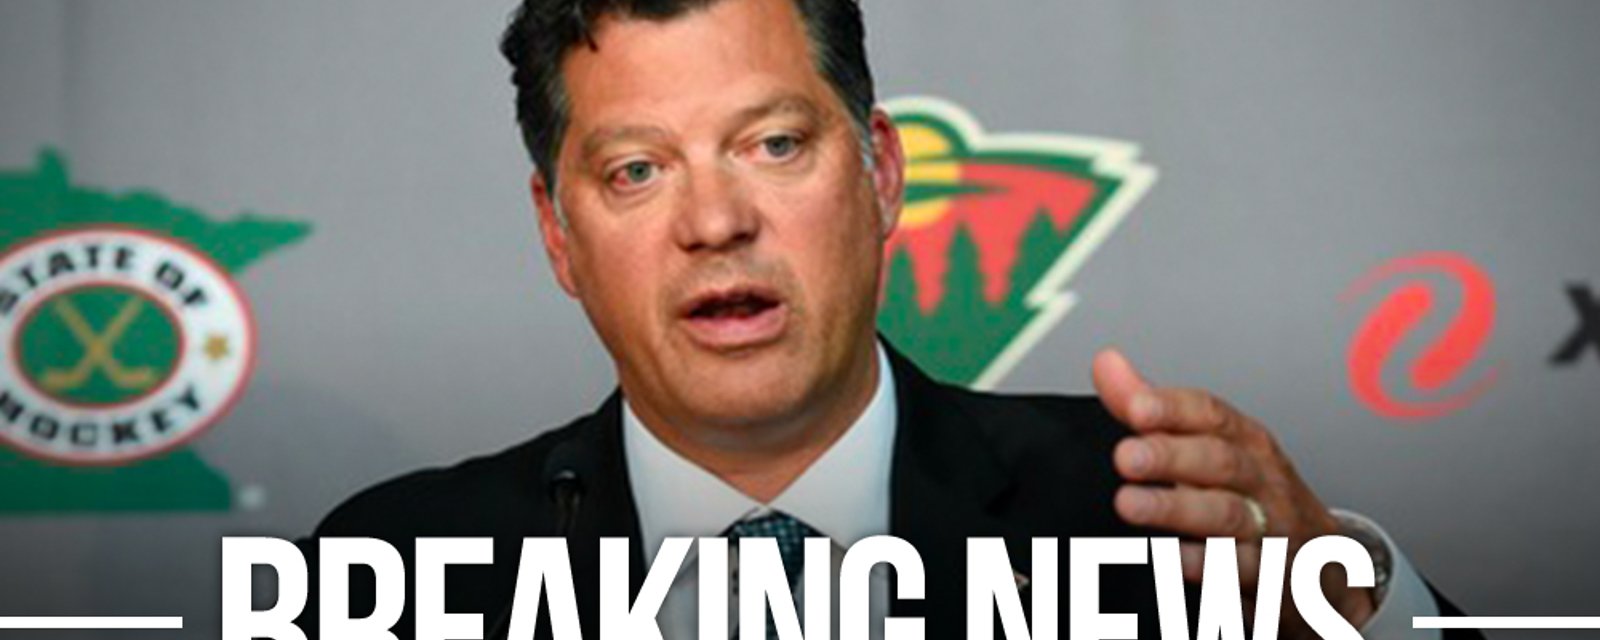 Bill Guerin “emphatically responds” to allegations from his time with Penguins